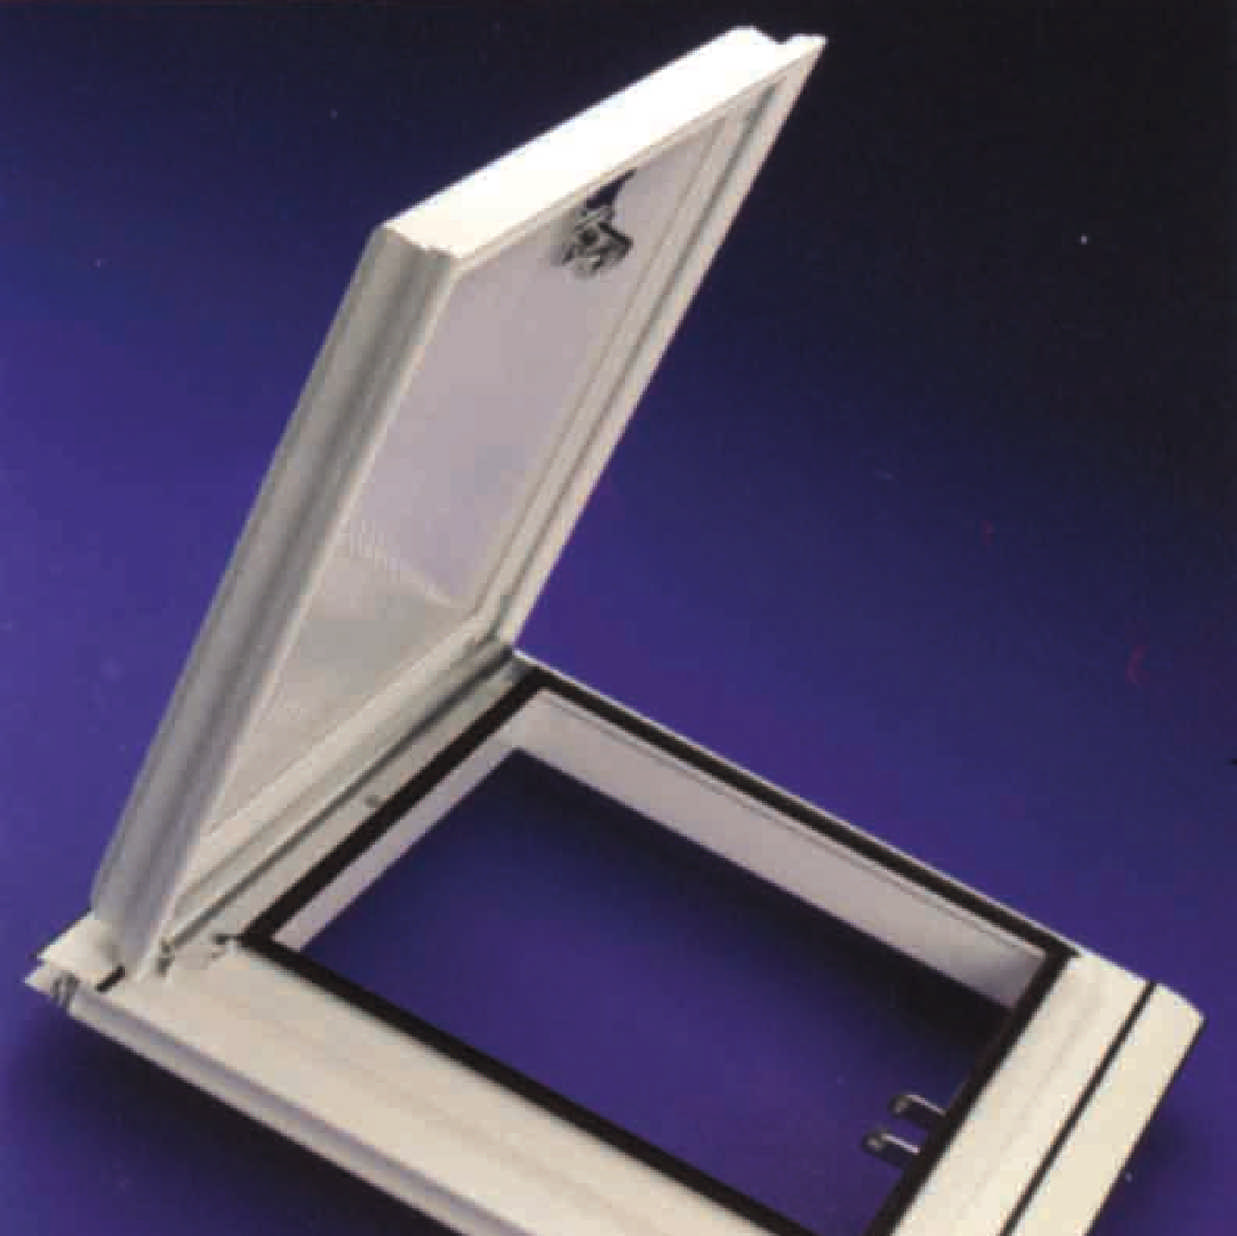 Buy Aluminium/uPVC Conservatory Roof Vent (Bar-to-Bar) for 24mm thick glass online today